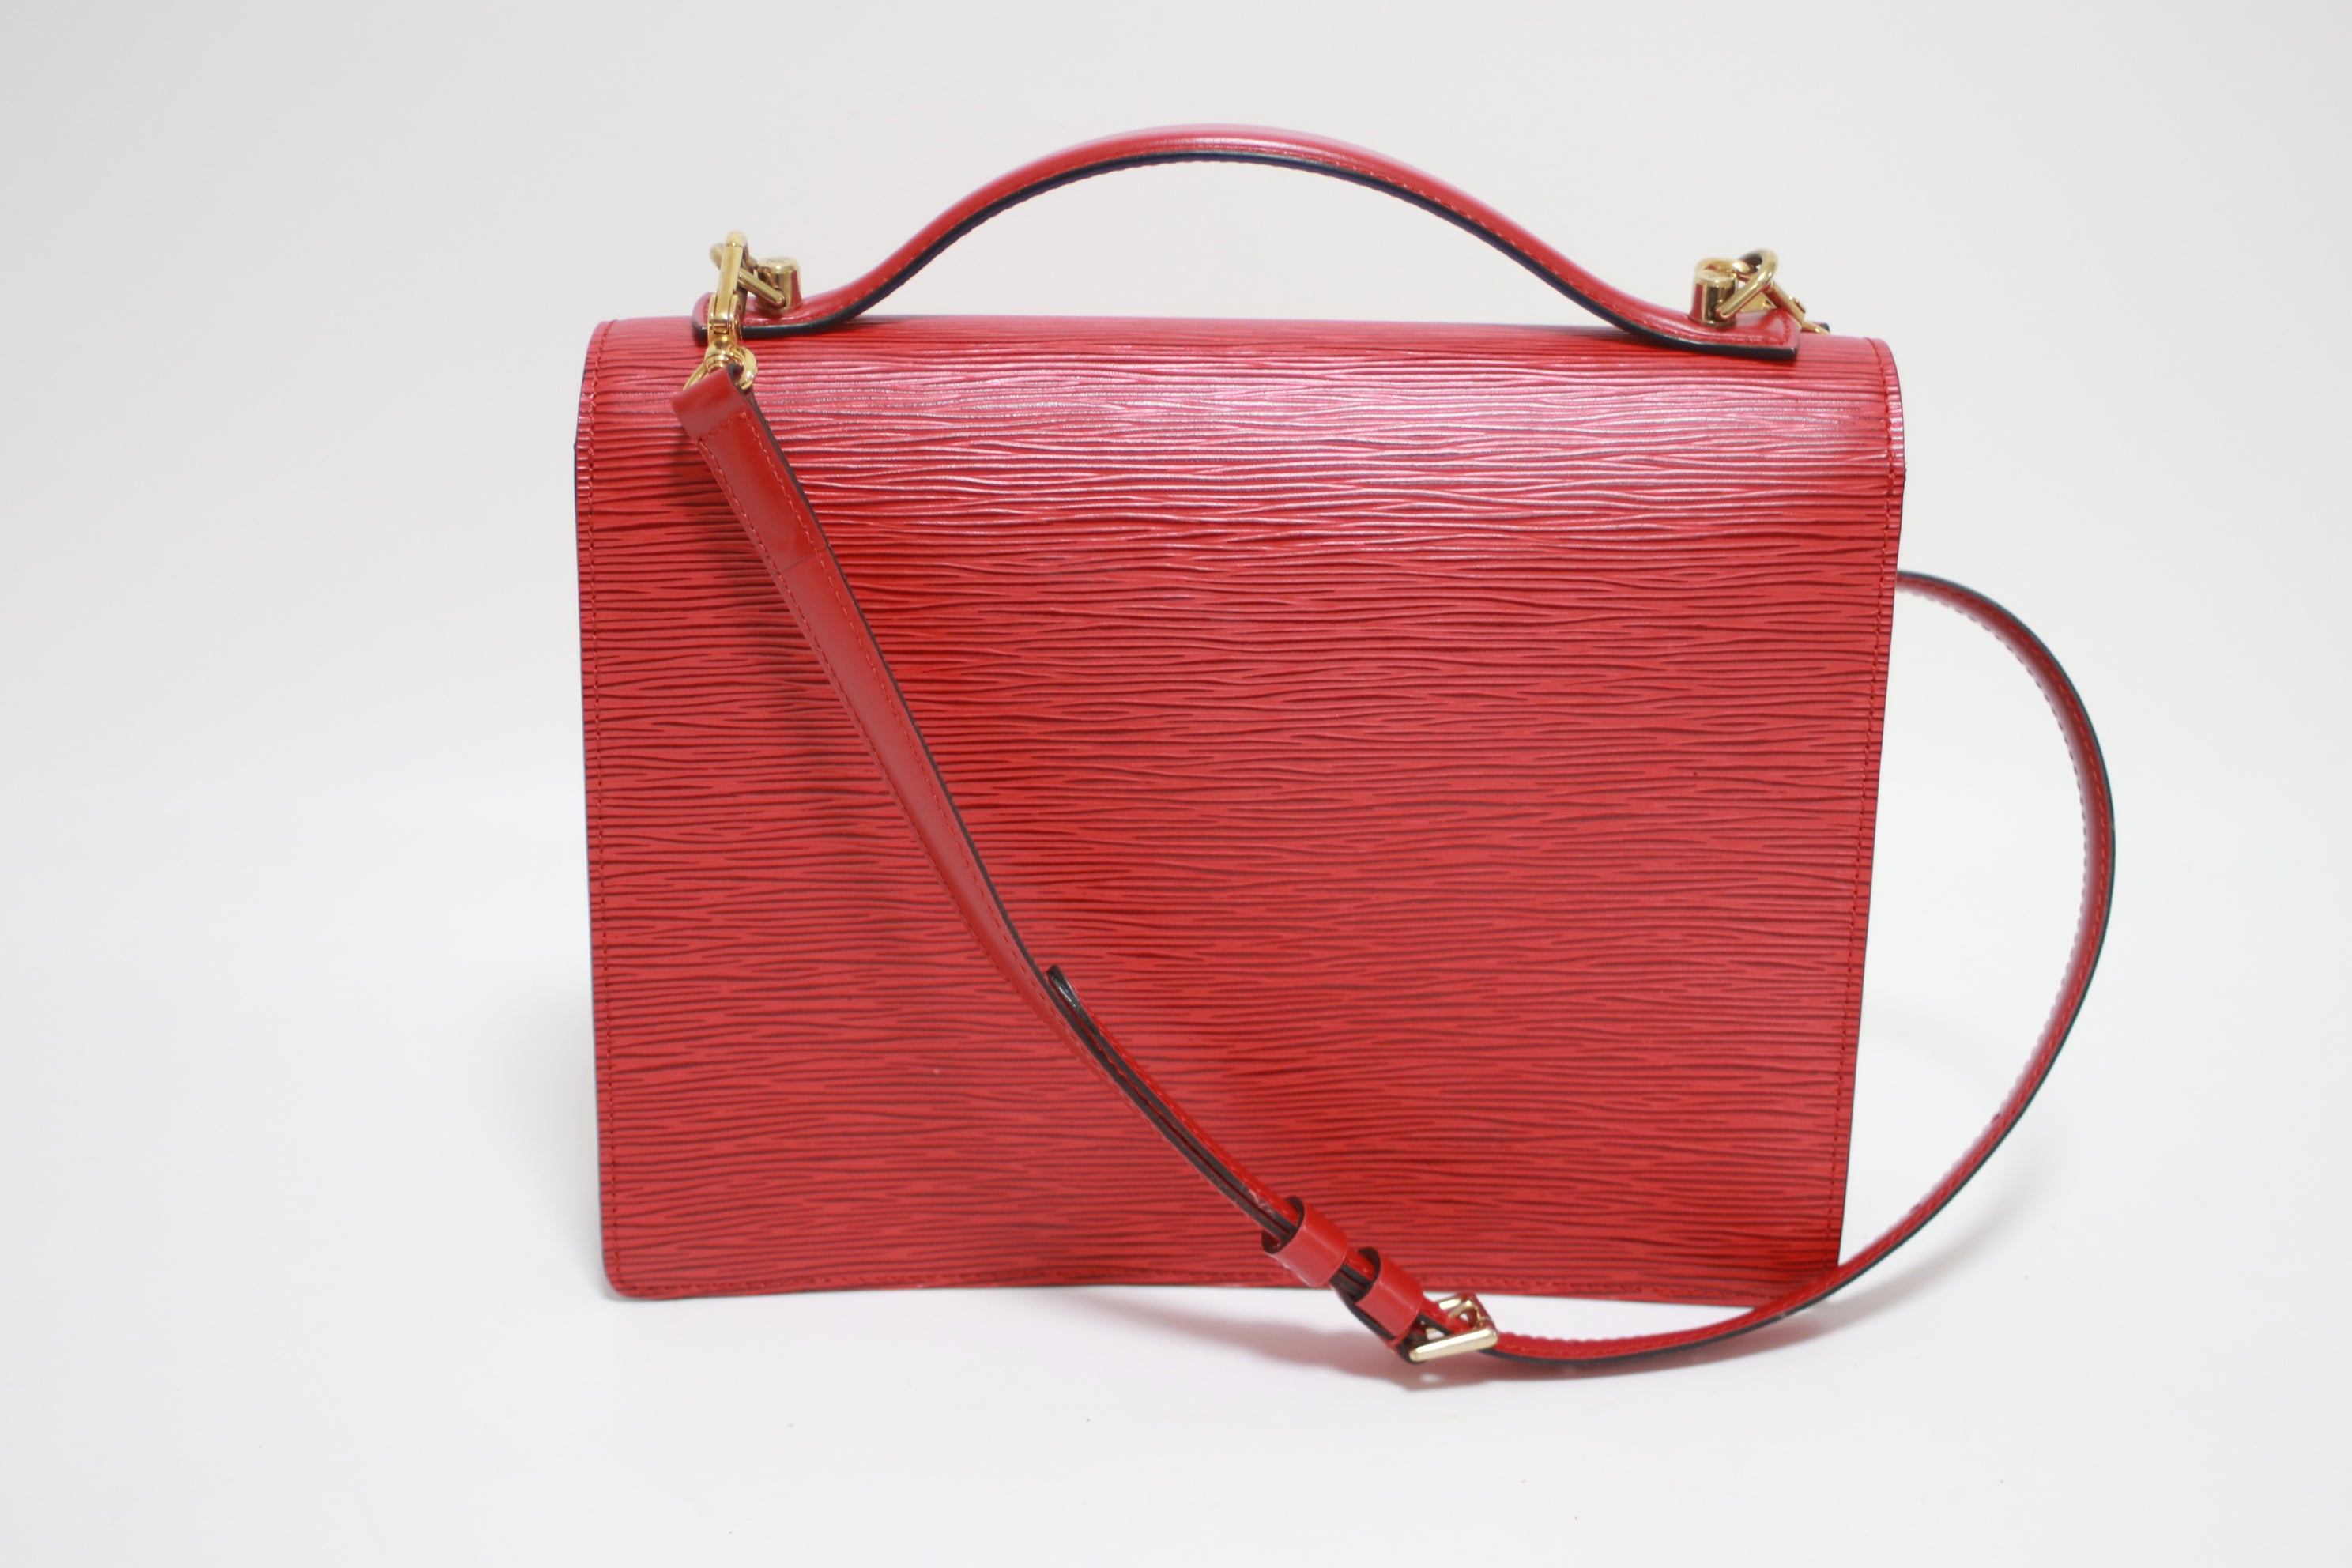 Louis Vuitton Monceau 28 Epi Red Two Way Handbag Used (7693)